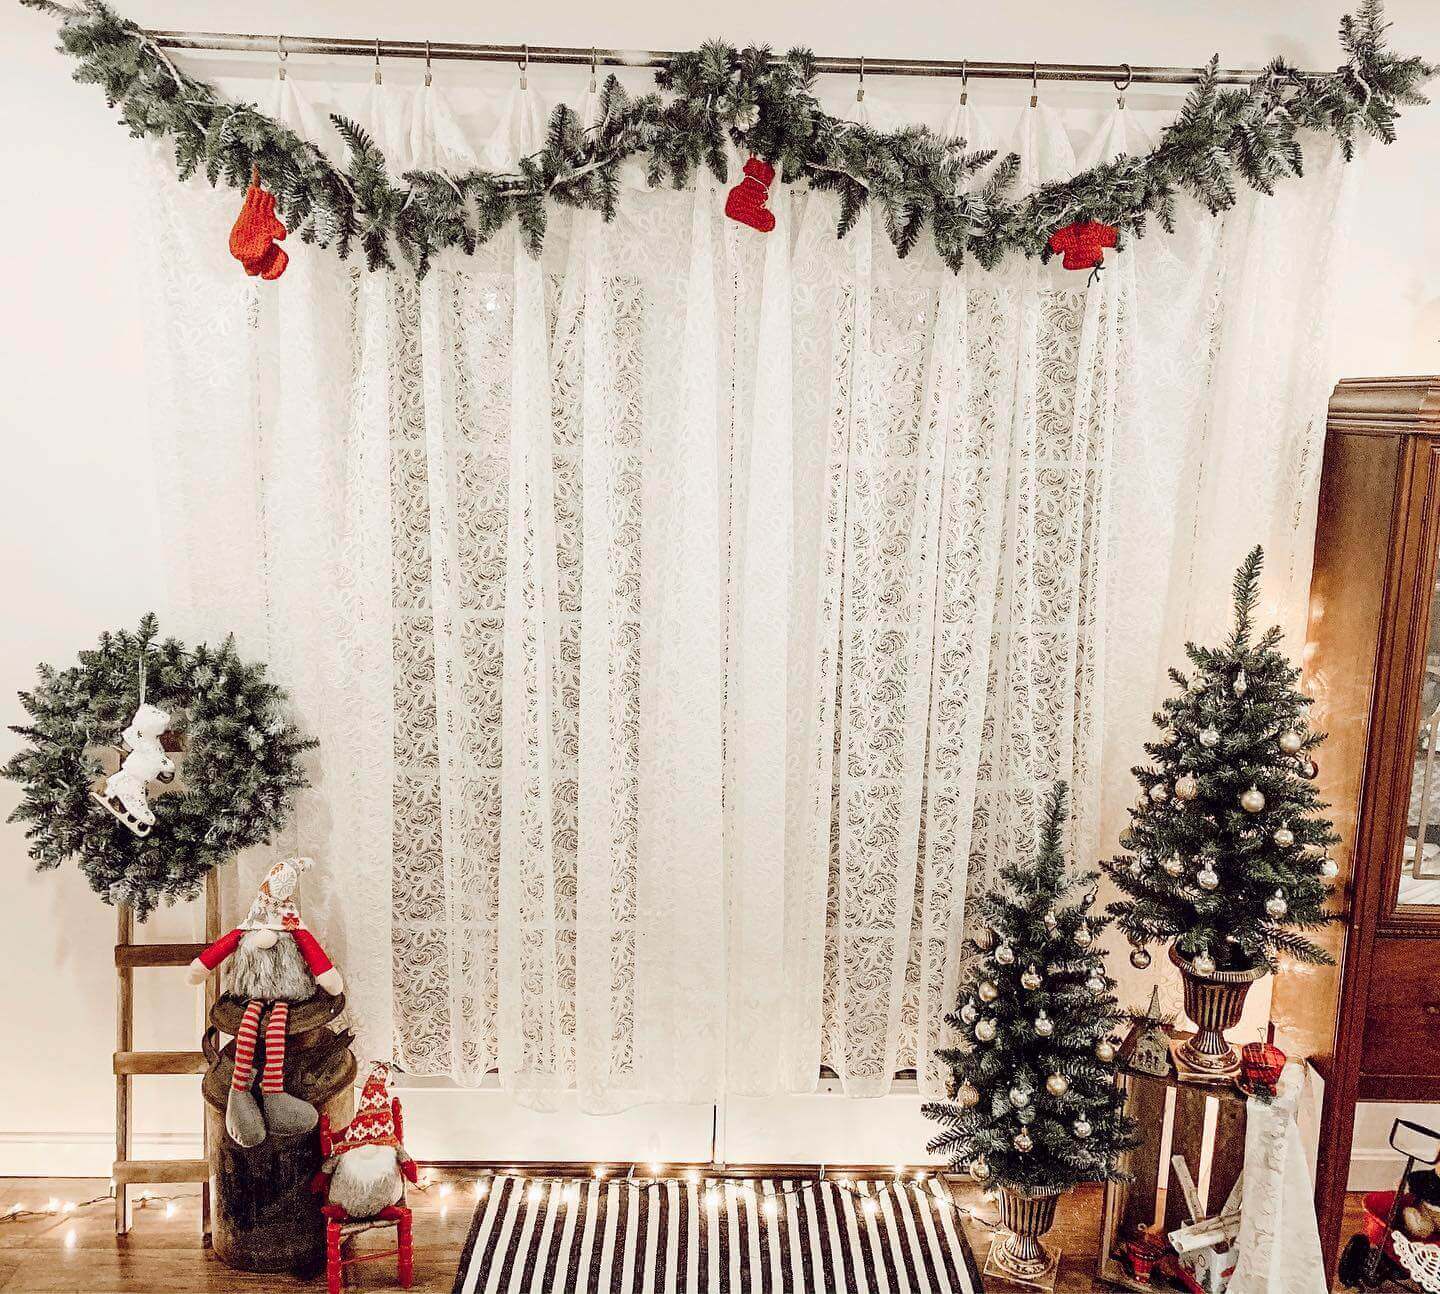 12 Pieces 79 ft Christmas Garland White Garland for Christmas Tree